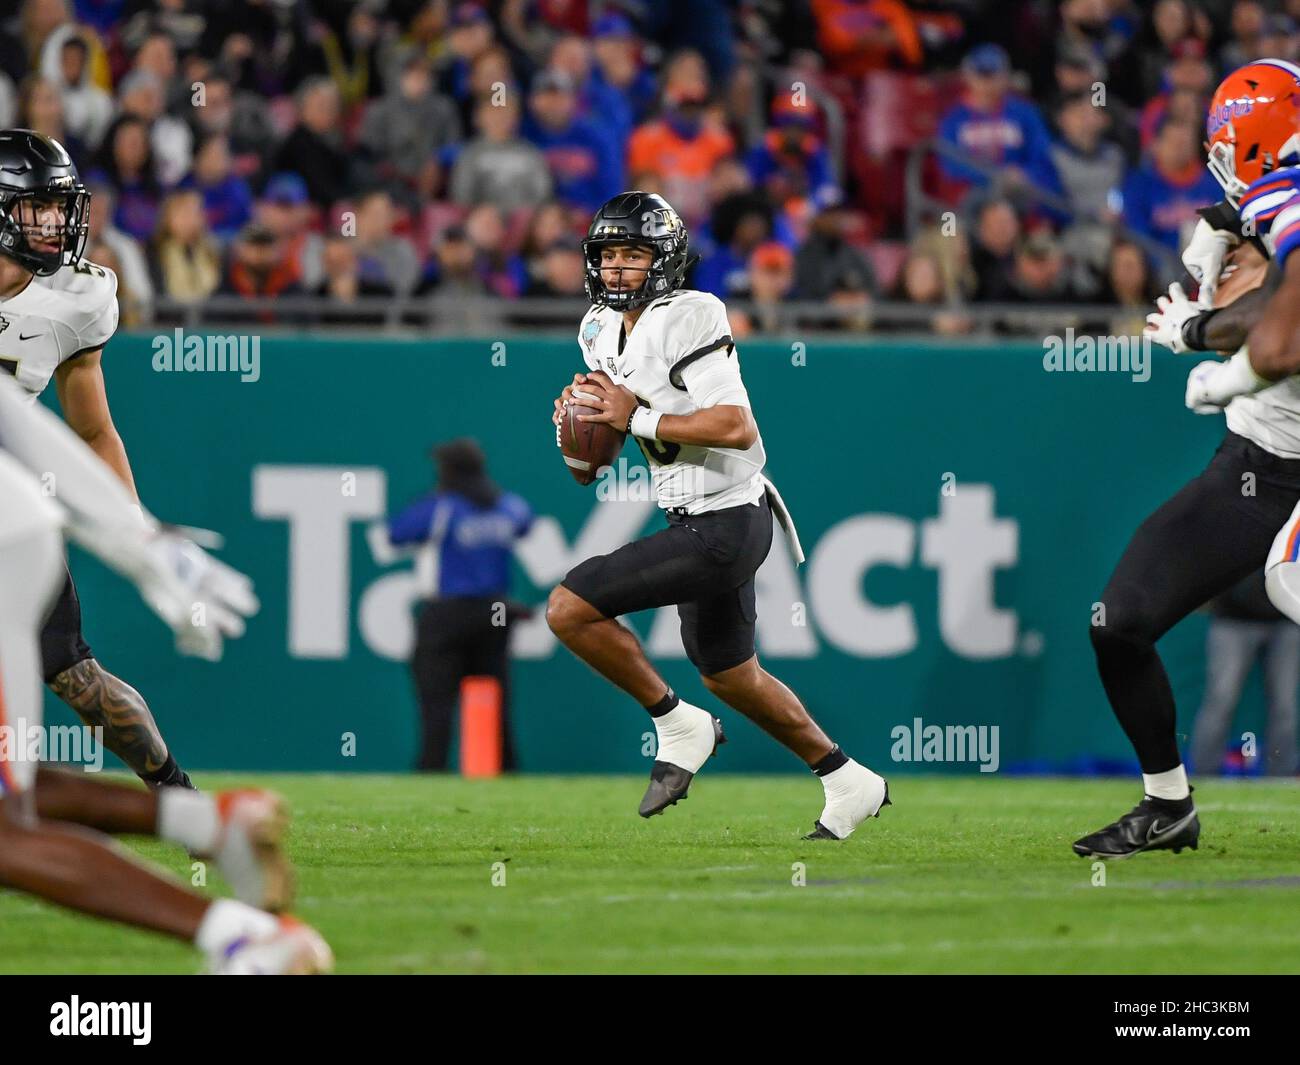 Tampa, FL, USA. 23rd Dec, 2021. UCF Knights quarterback Mikey Keene (16) looks to throw the ball during the 1st half of Union Home Mortgage Gasparilla Bowl between the Florida Gators and the UCF Knights at Raymond James Stadium in Tampa, FL. Romeo T Guzman/CSM/Alamy Live News Stock Photo